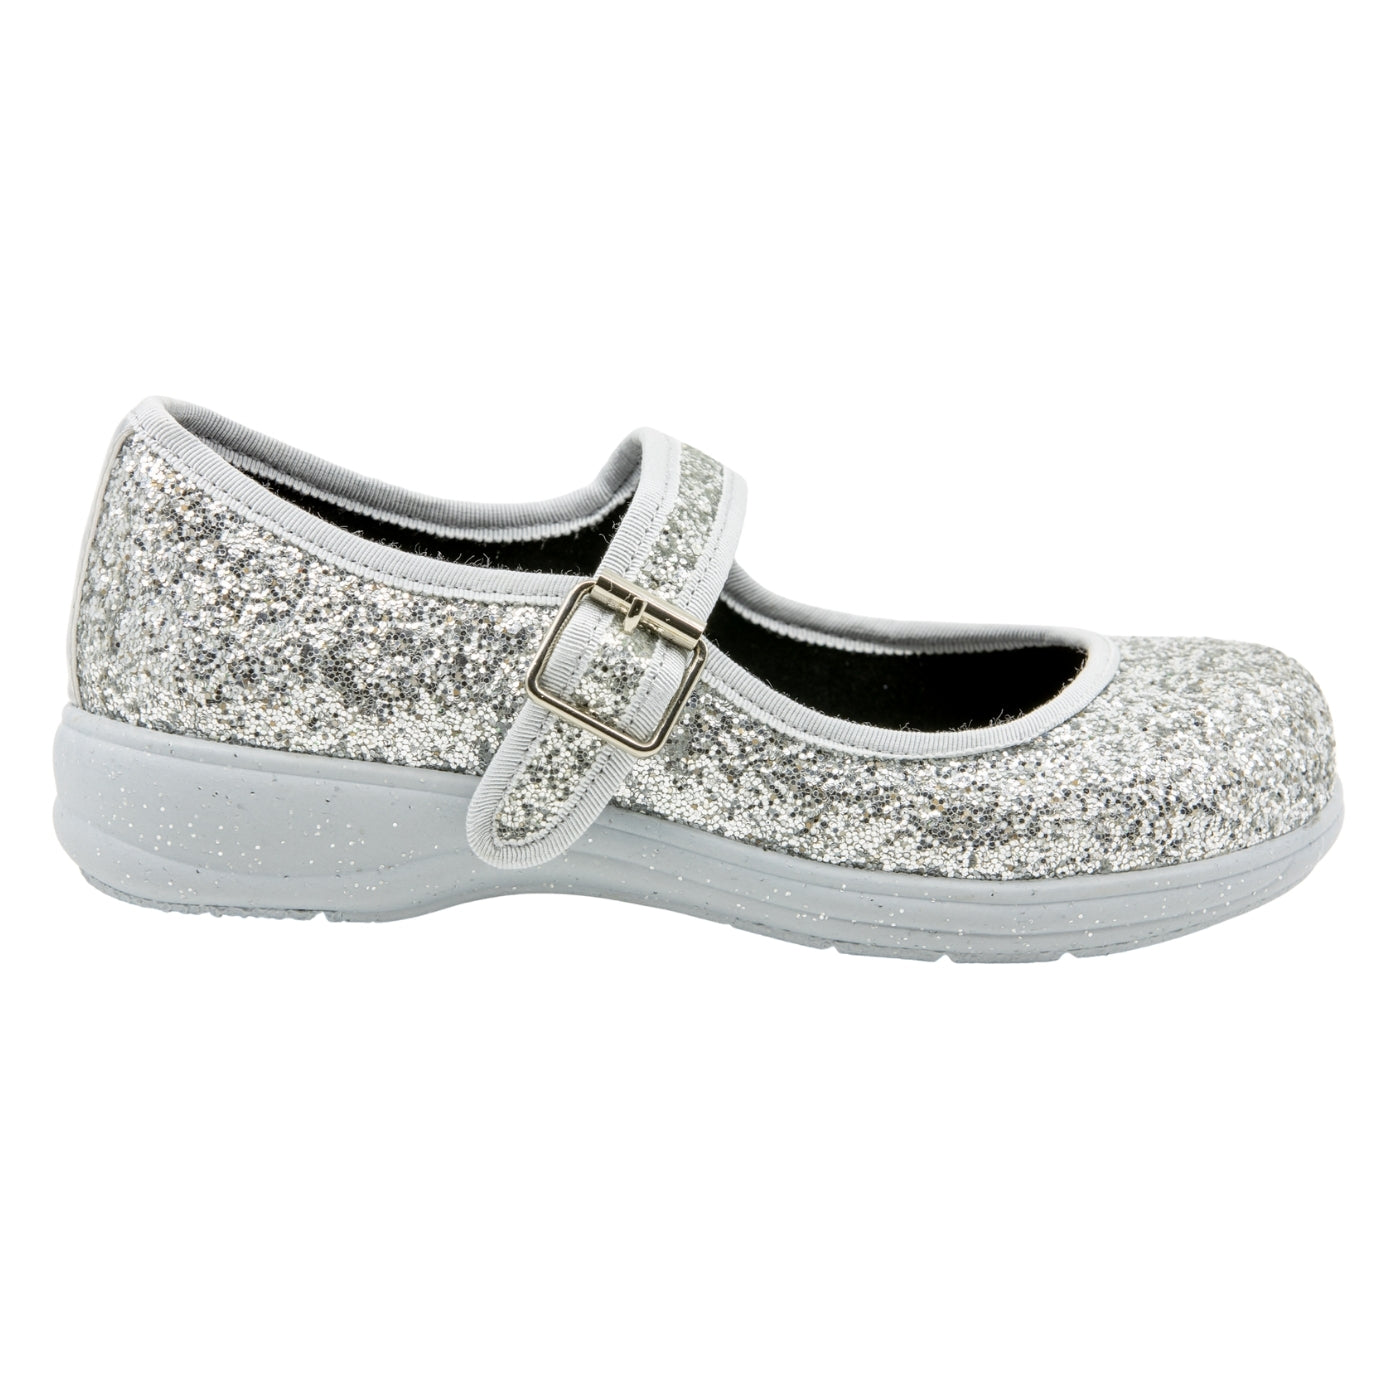 Disco Mary Janes by RainbowsAndFairies.com.au (Silver Glitter - Disco Ball - Sparkle Shoes - Buckle Shoes - Mismatched Shoes - Cute & Comfy) - SKU: FW_MARYJ_DISCO_ORG - Pic-04